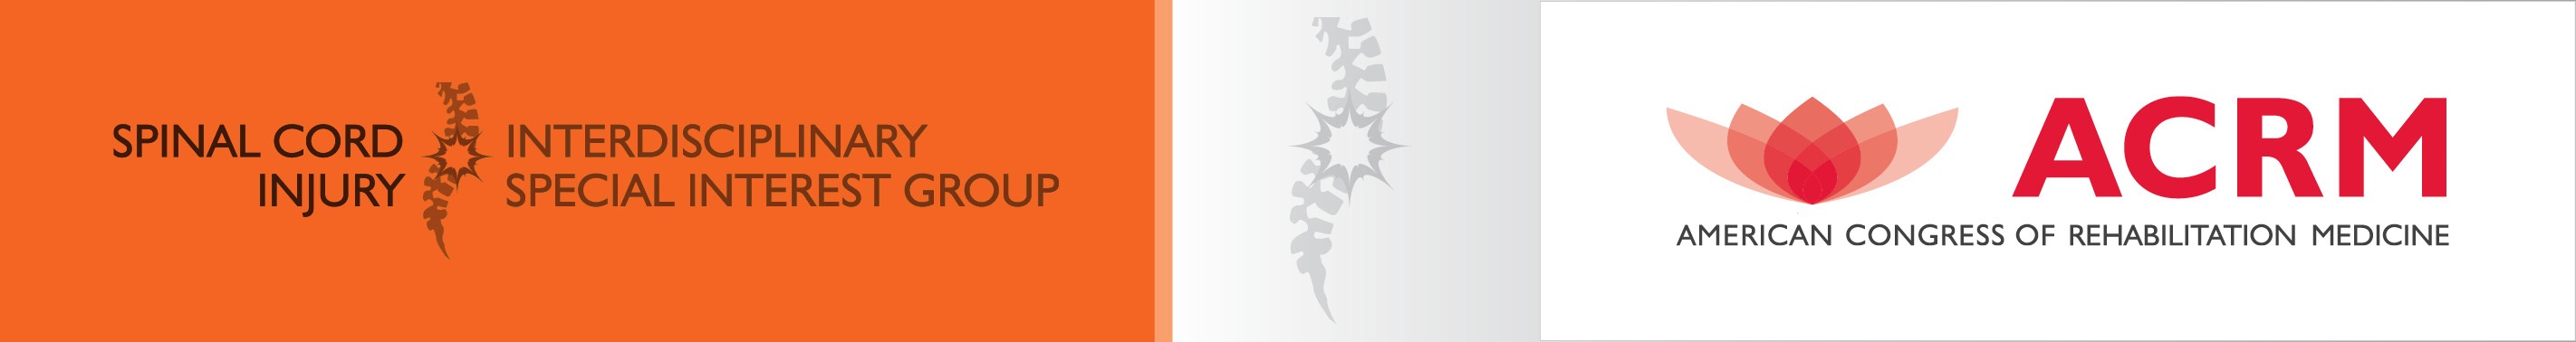 ACRM Spinal Cord Injury ISIG banner